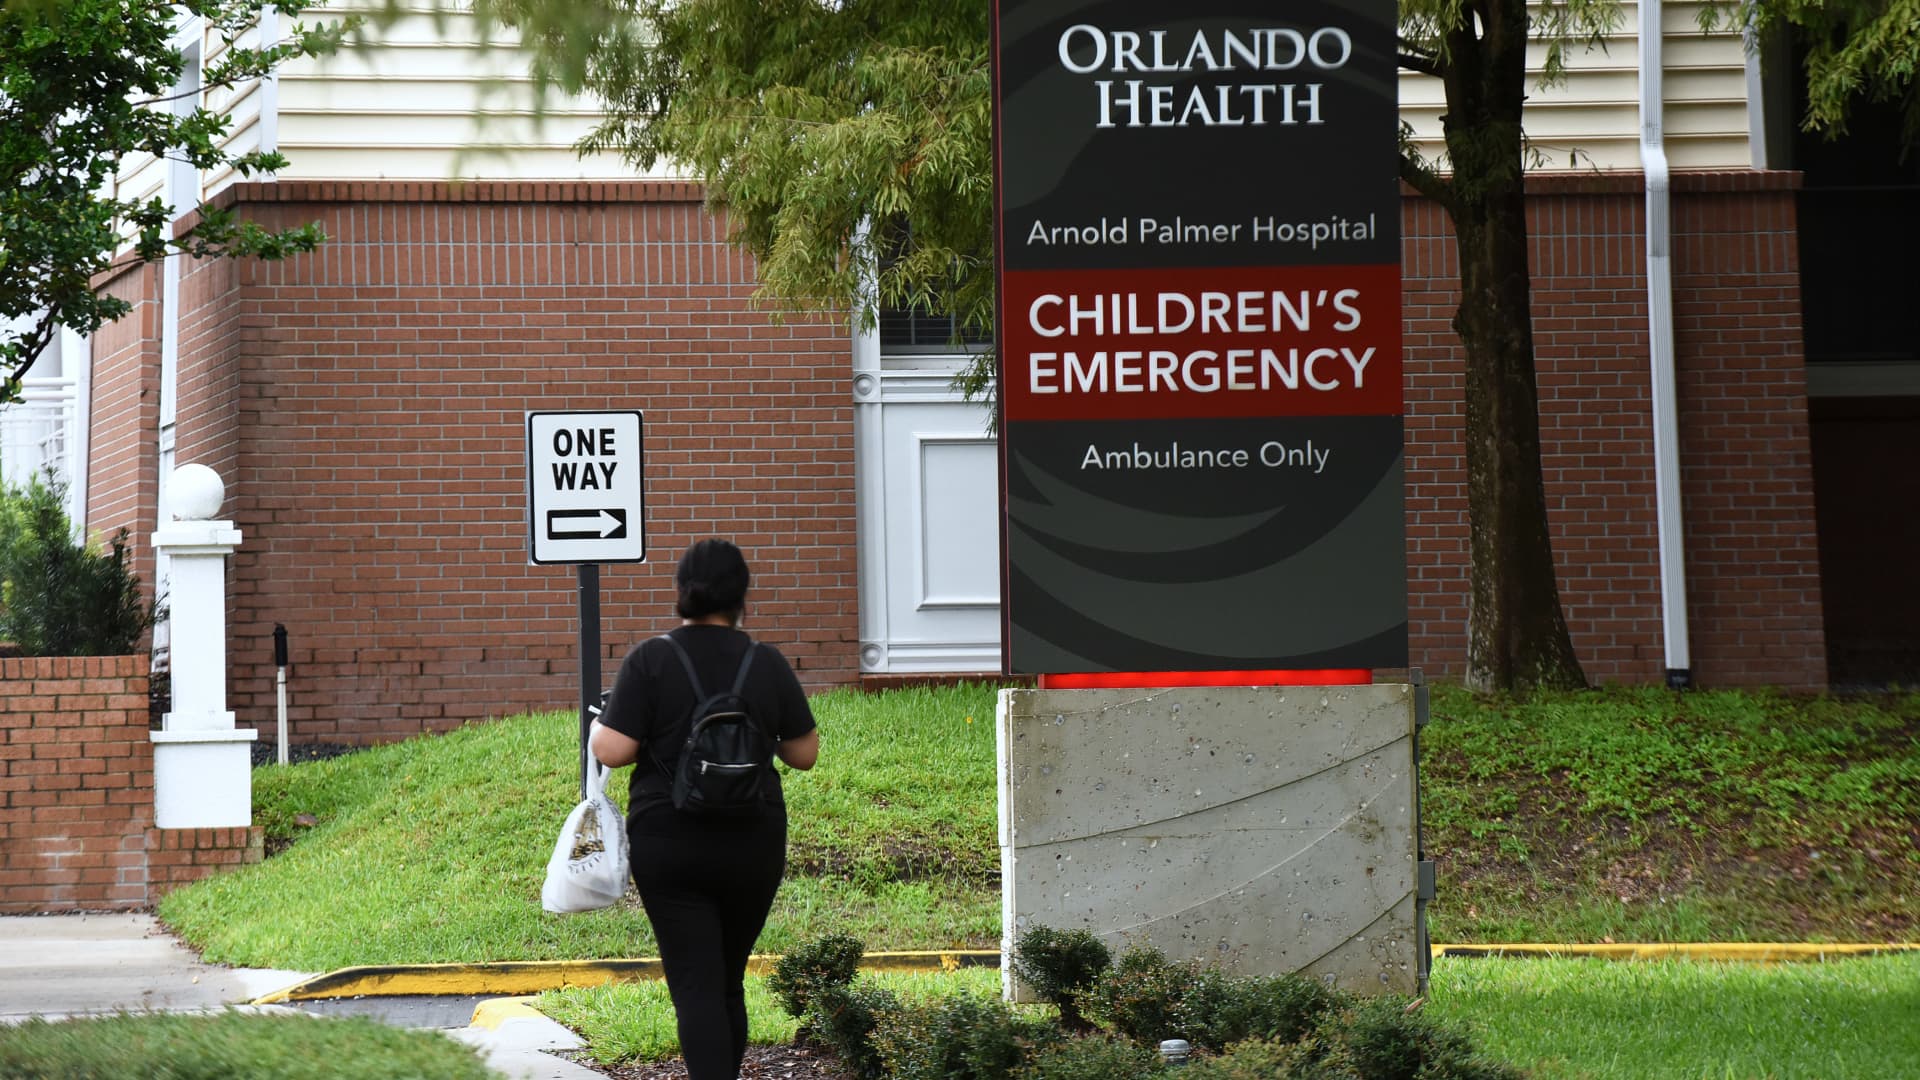 A woman walks near the emergency entrance at Arnold Palmer Hospital for Children.